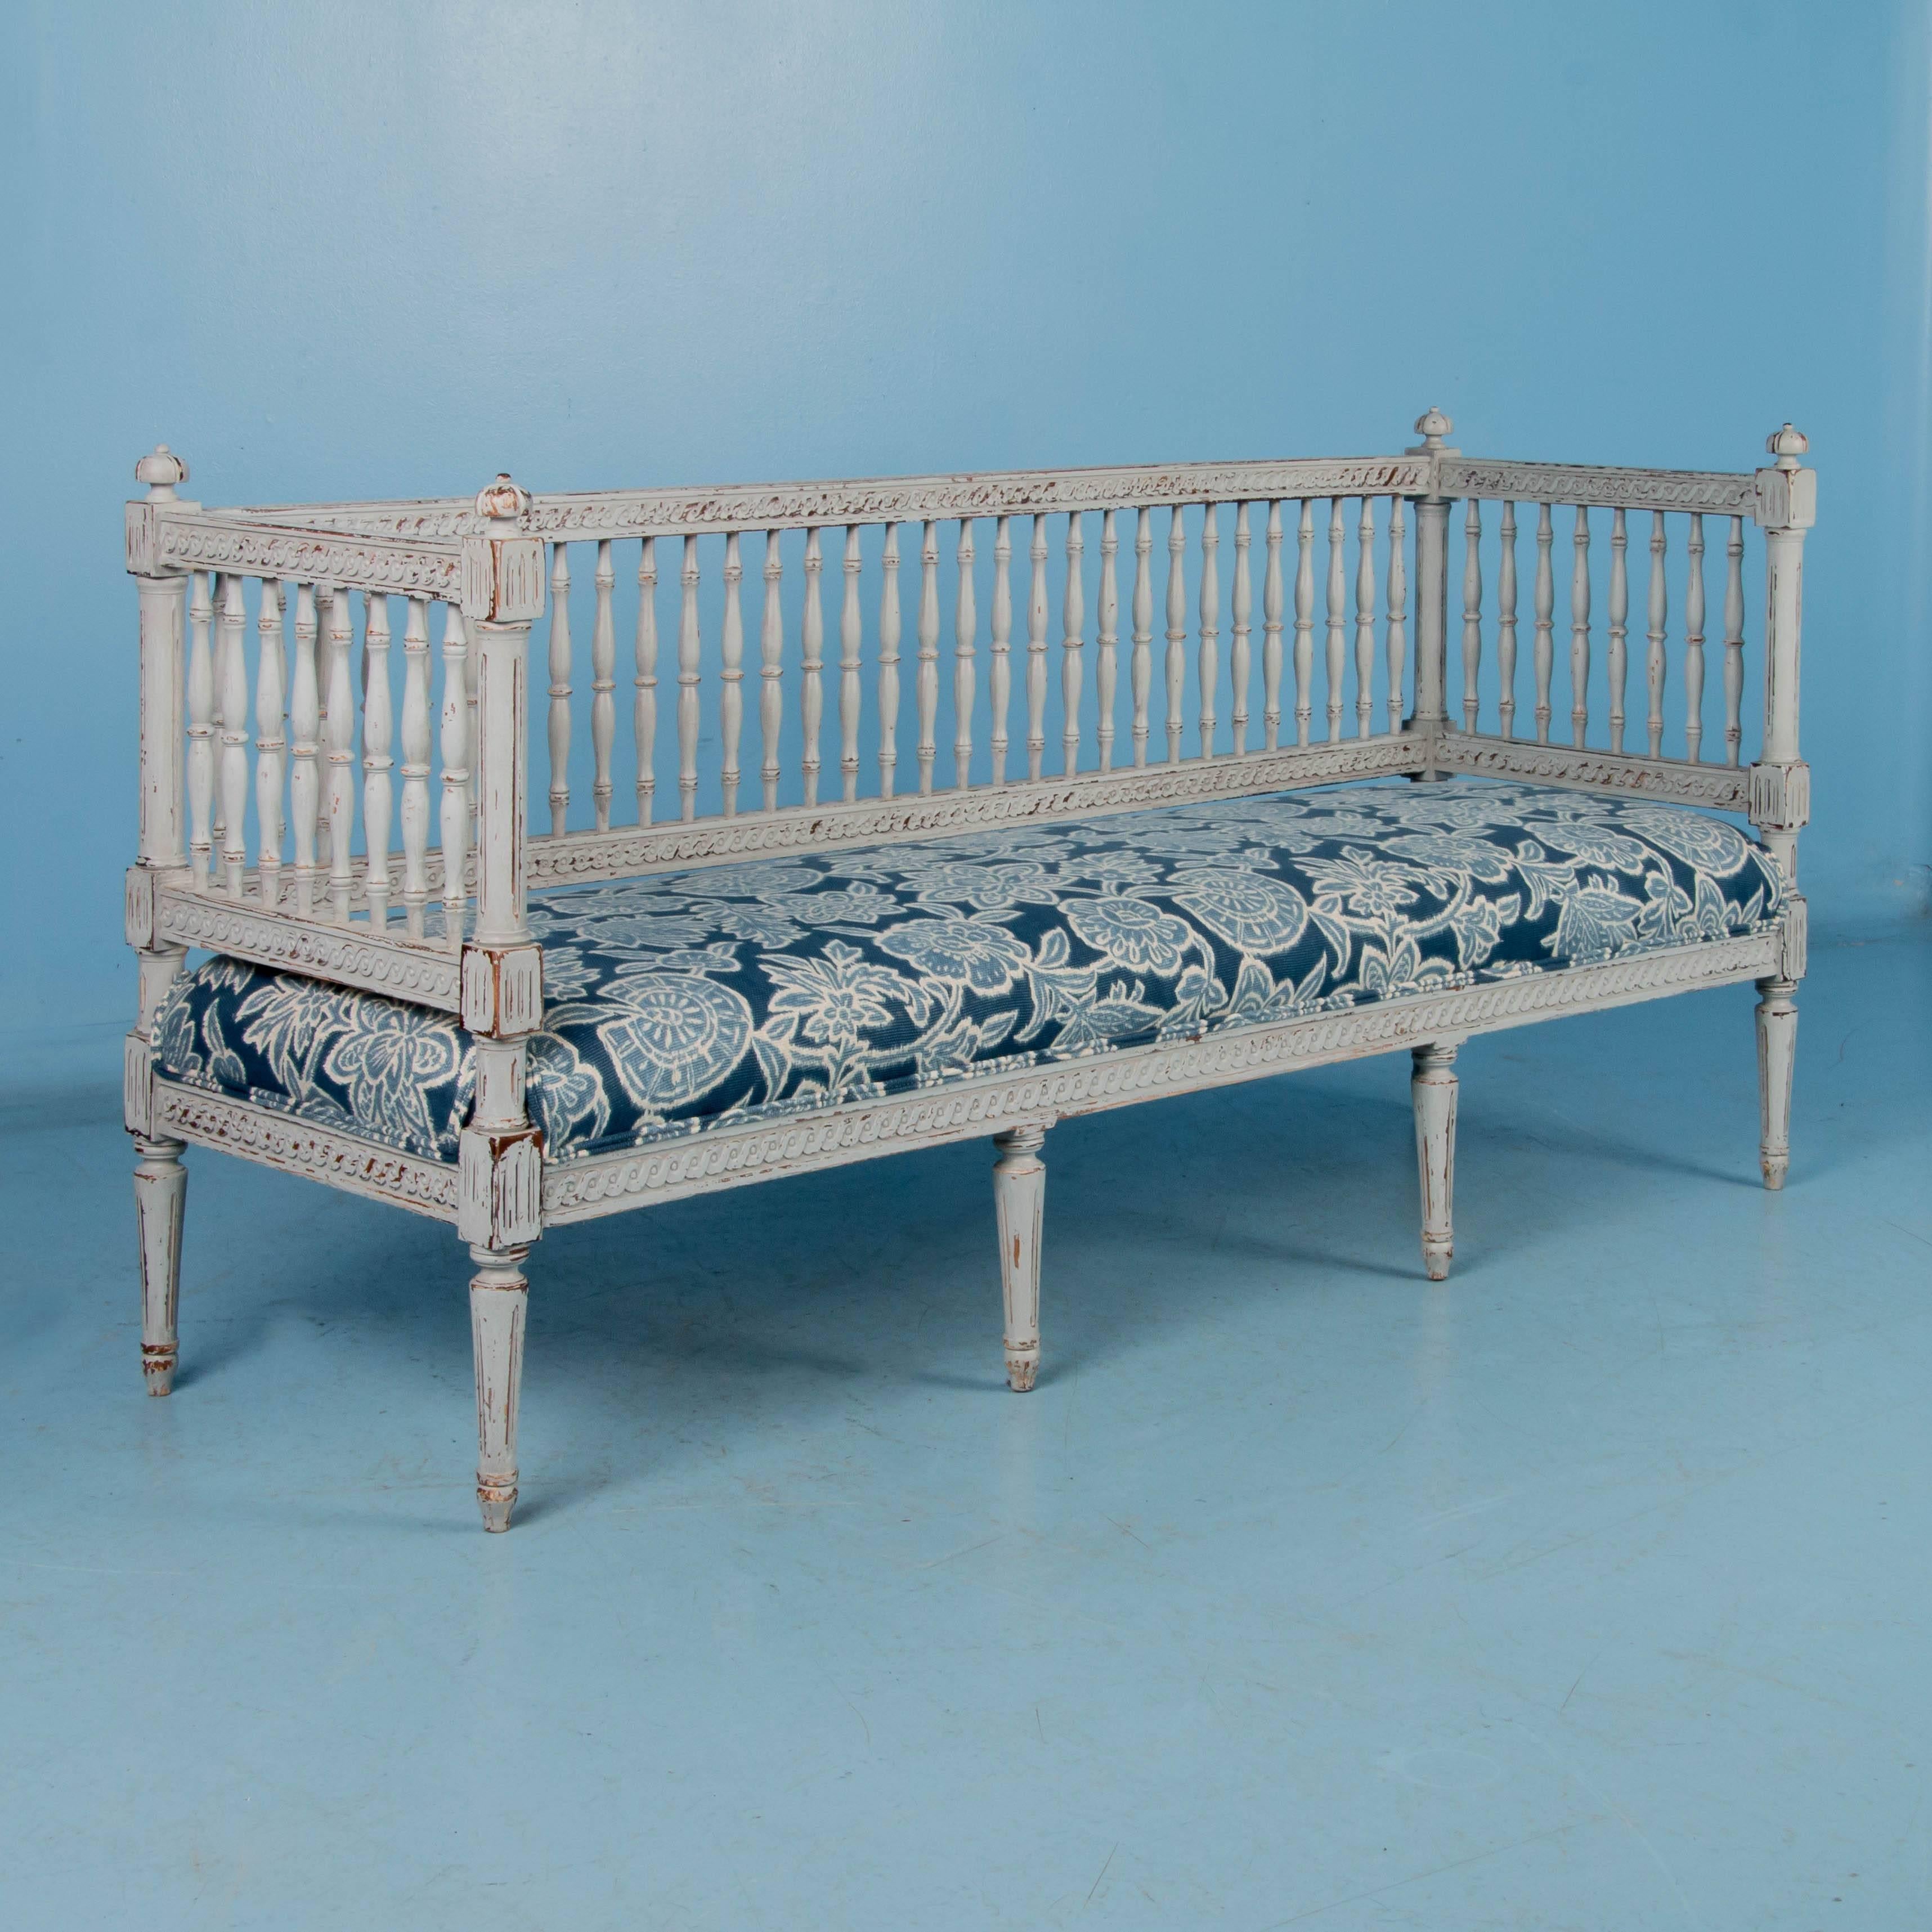 Mid-19th century antique sofa or bench with spindled back and sides, resting on eight tapered feet, painted in the exquisite colors of the Gustavian period. Where the light gray painted finish is worn away, the darker natural wood comes through,